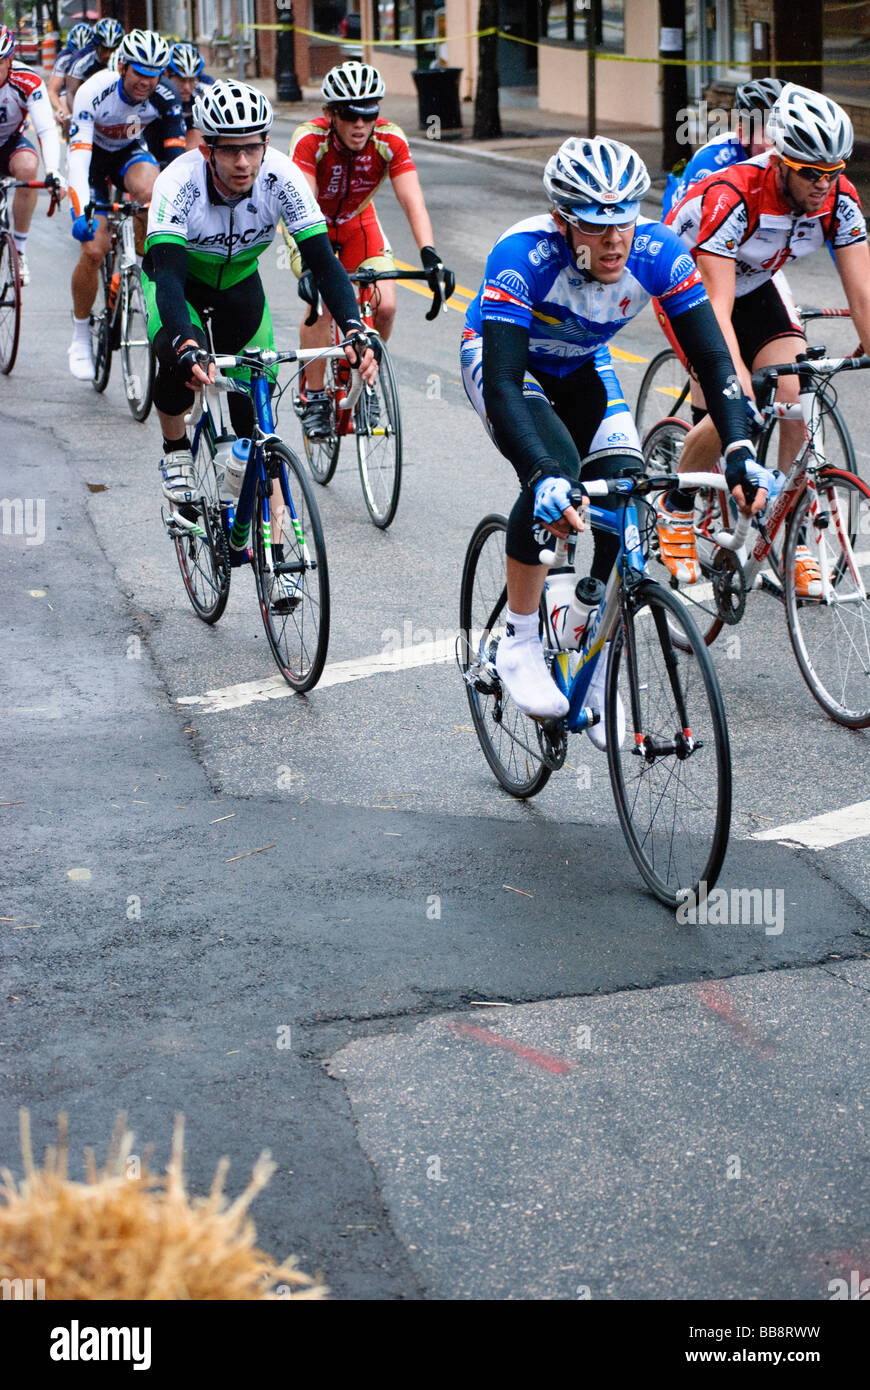 Annual Historic Downtown Wake Forest Criterium Cycling Race Stock Photo